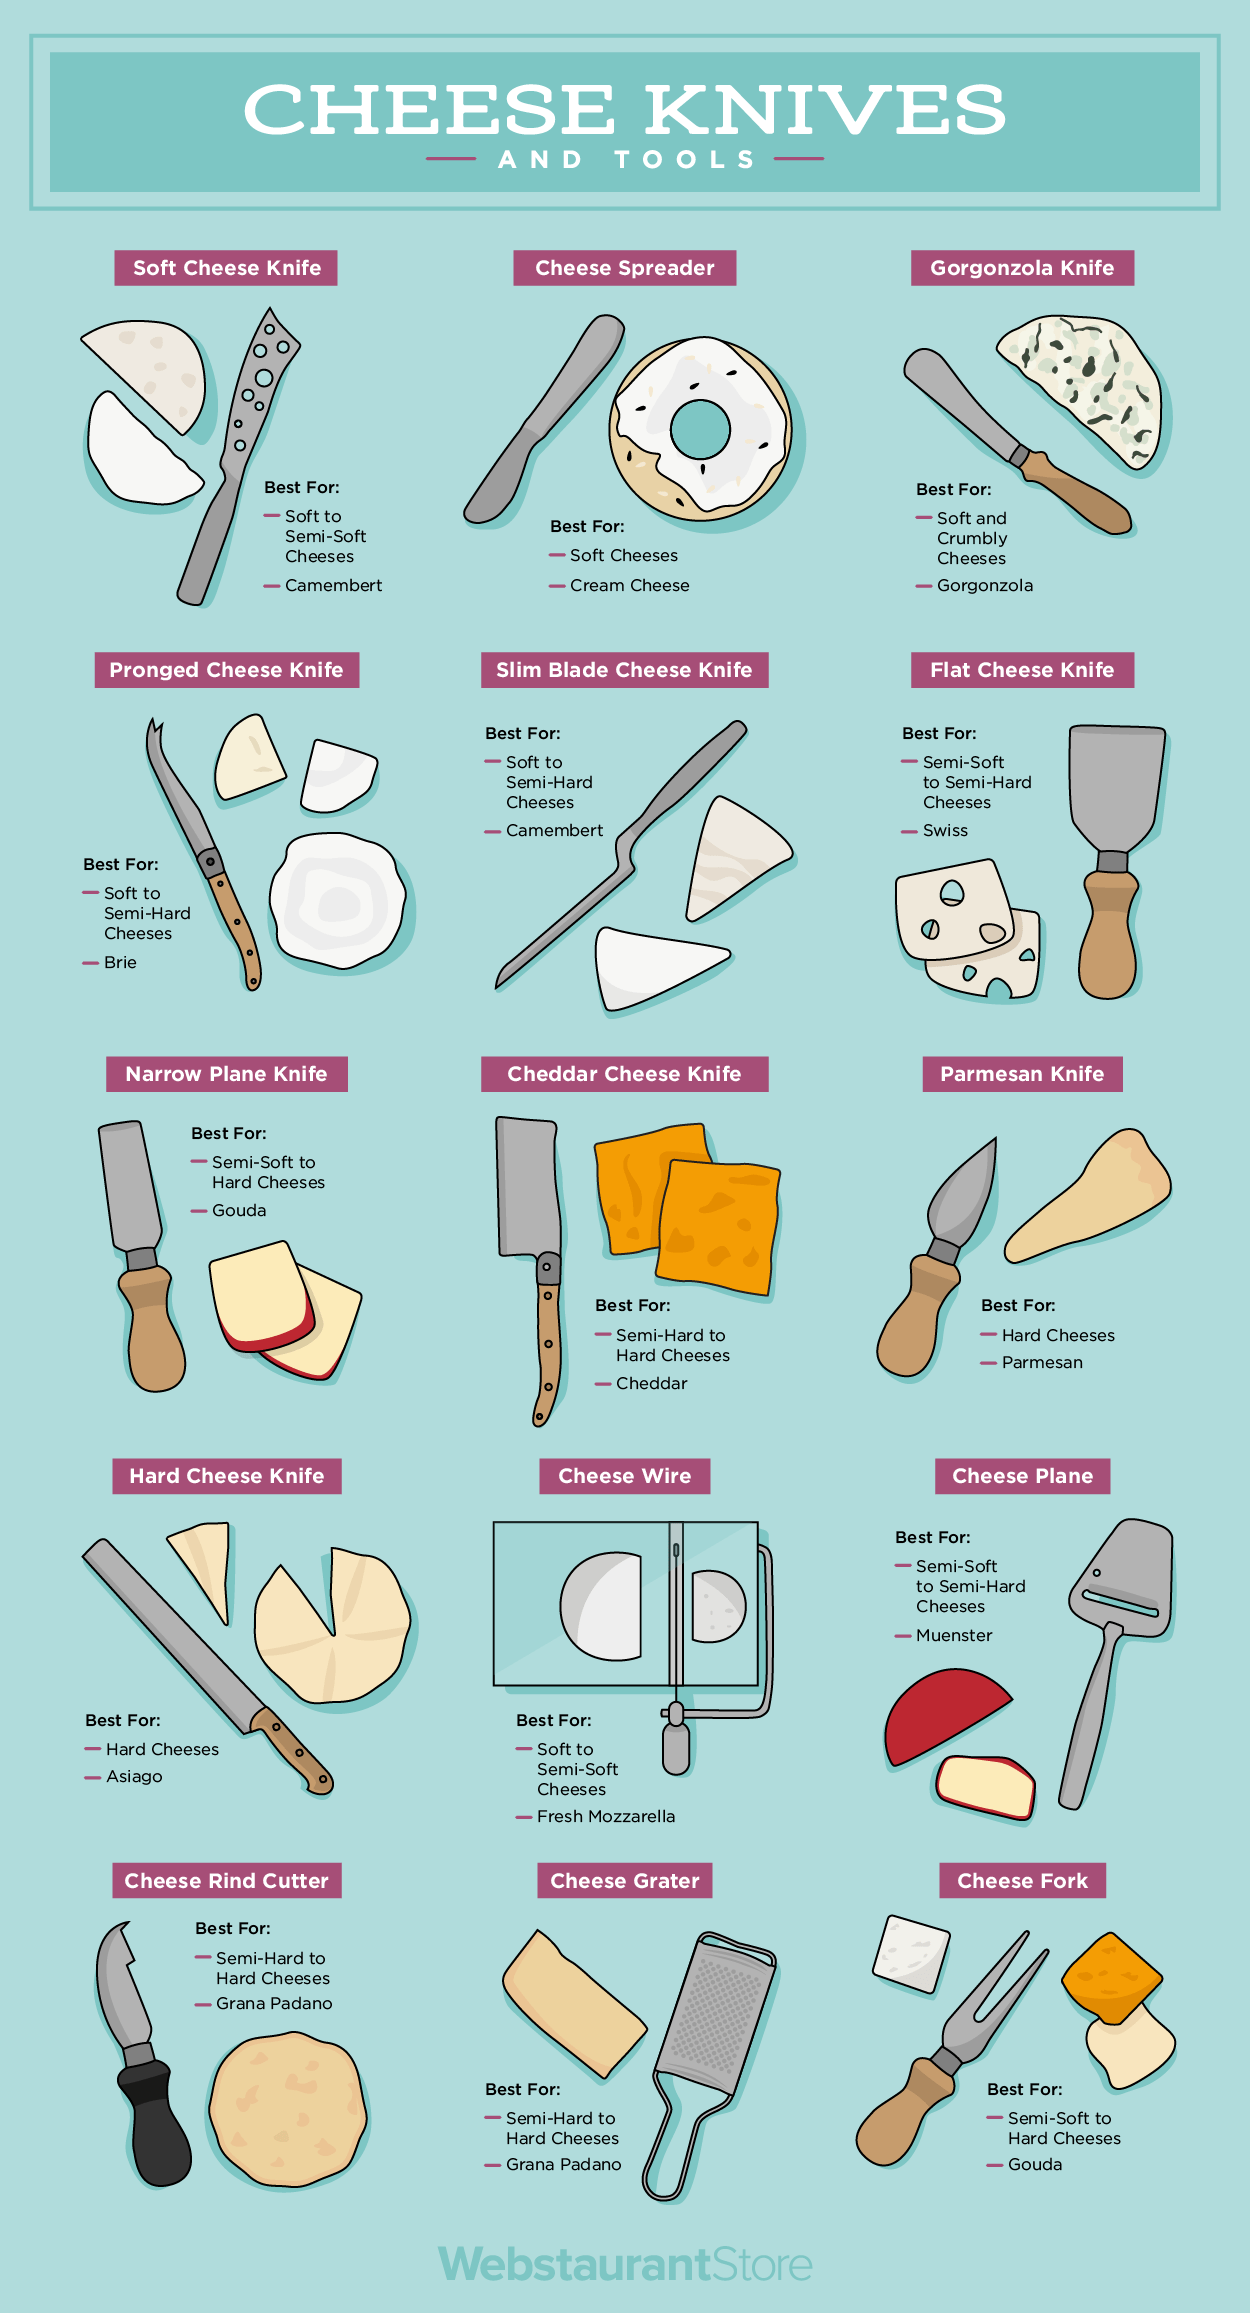 Cheese Knives and Tools Infographic